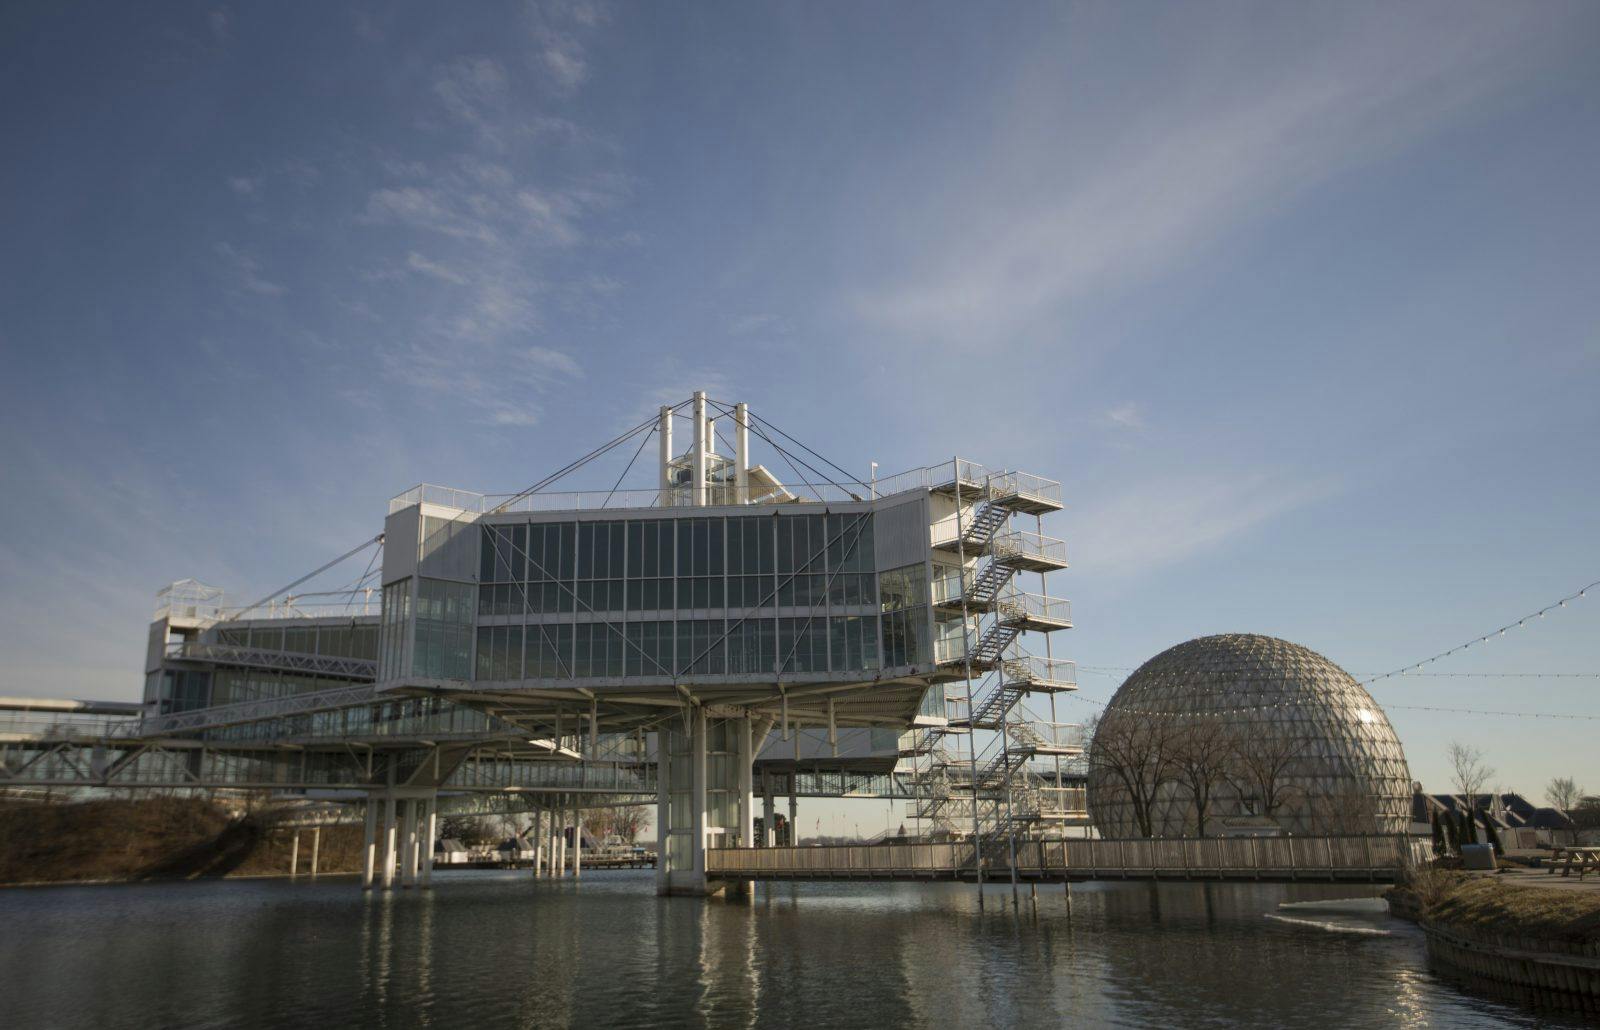 In ‘complete disrepair’: A brief political history of Ontario Place development